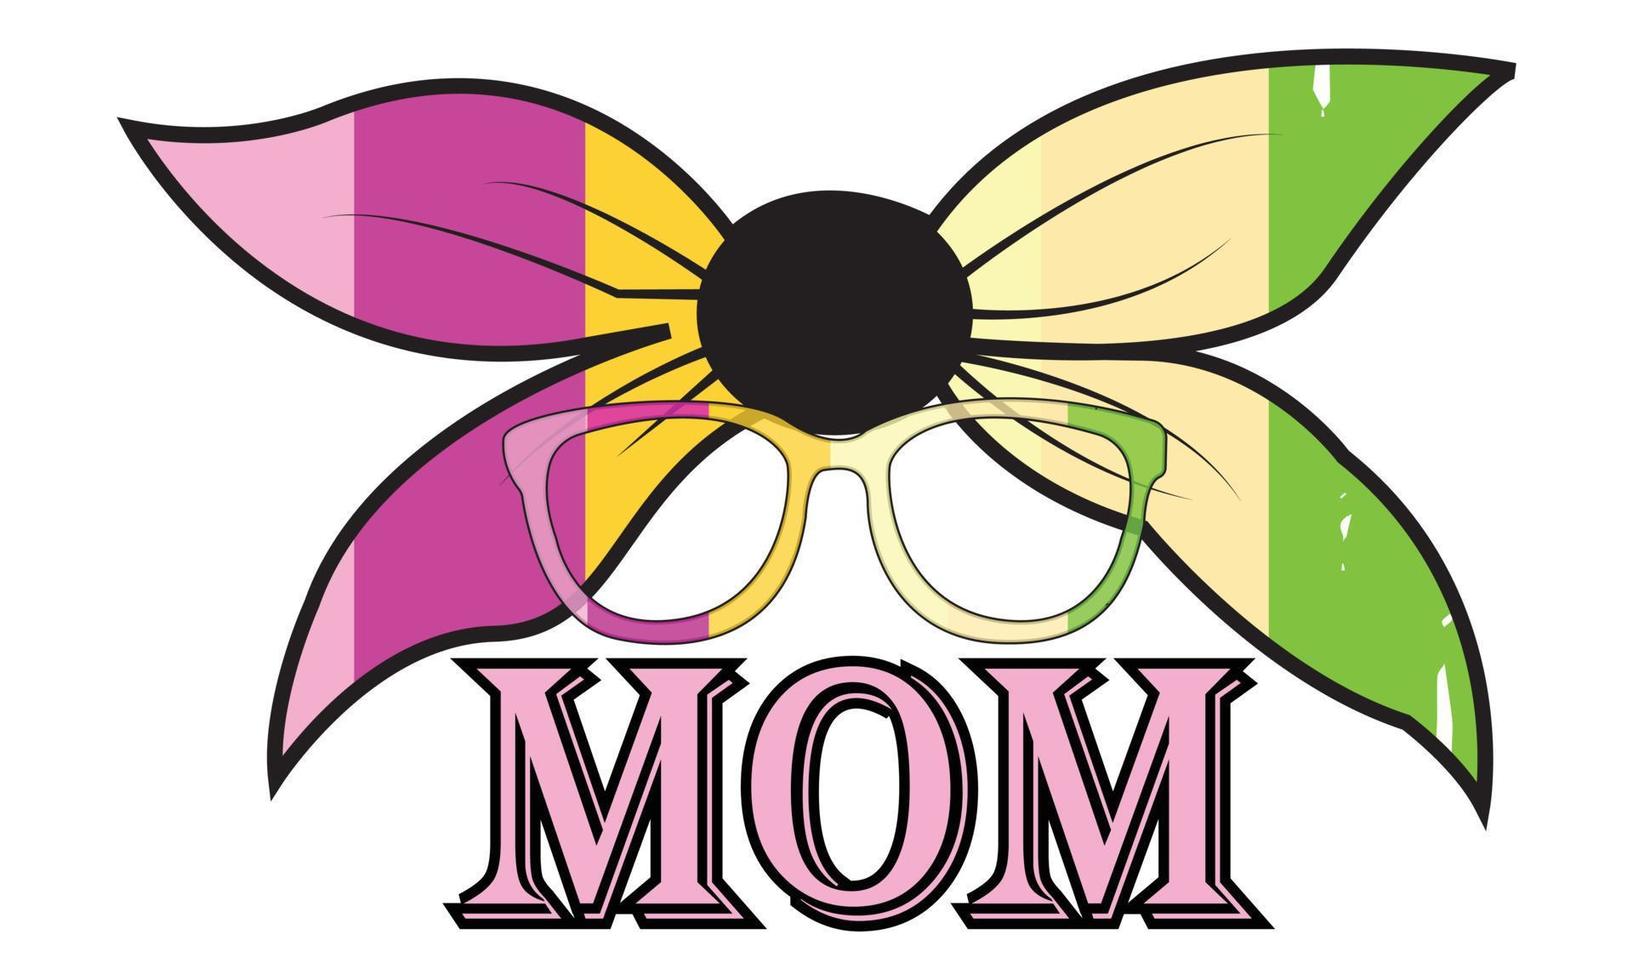 Happy Mothers, Mom, Mommy, Day T-shirt Design. vector